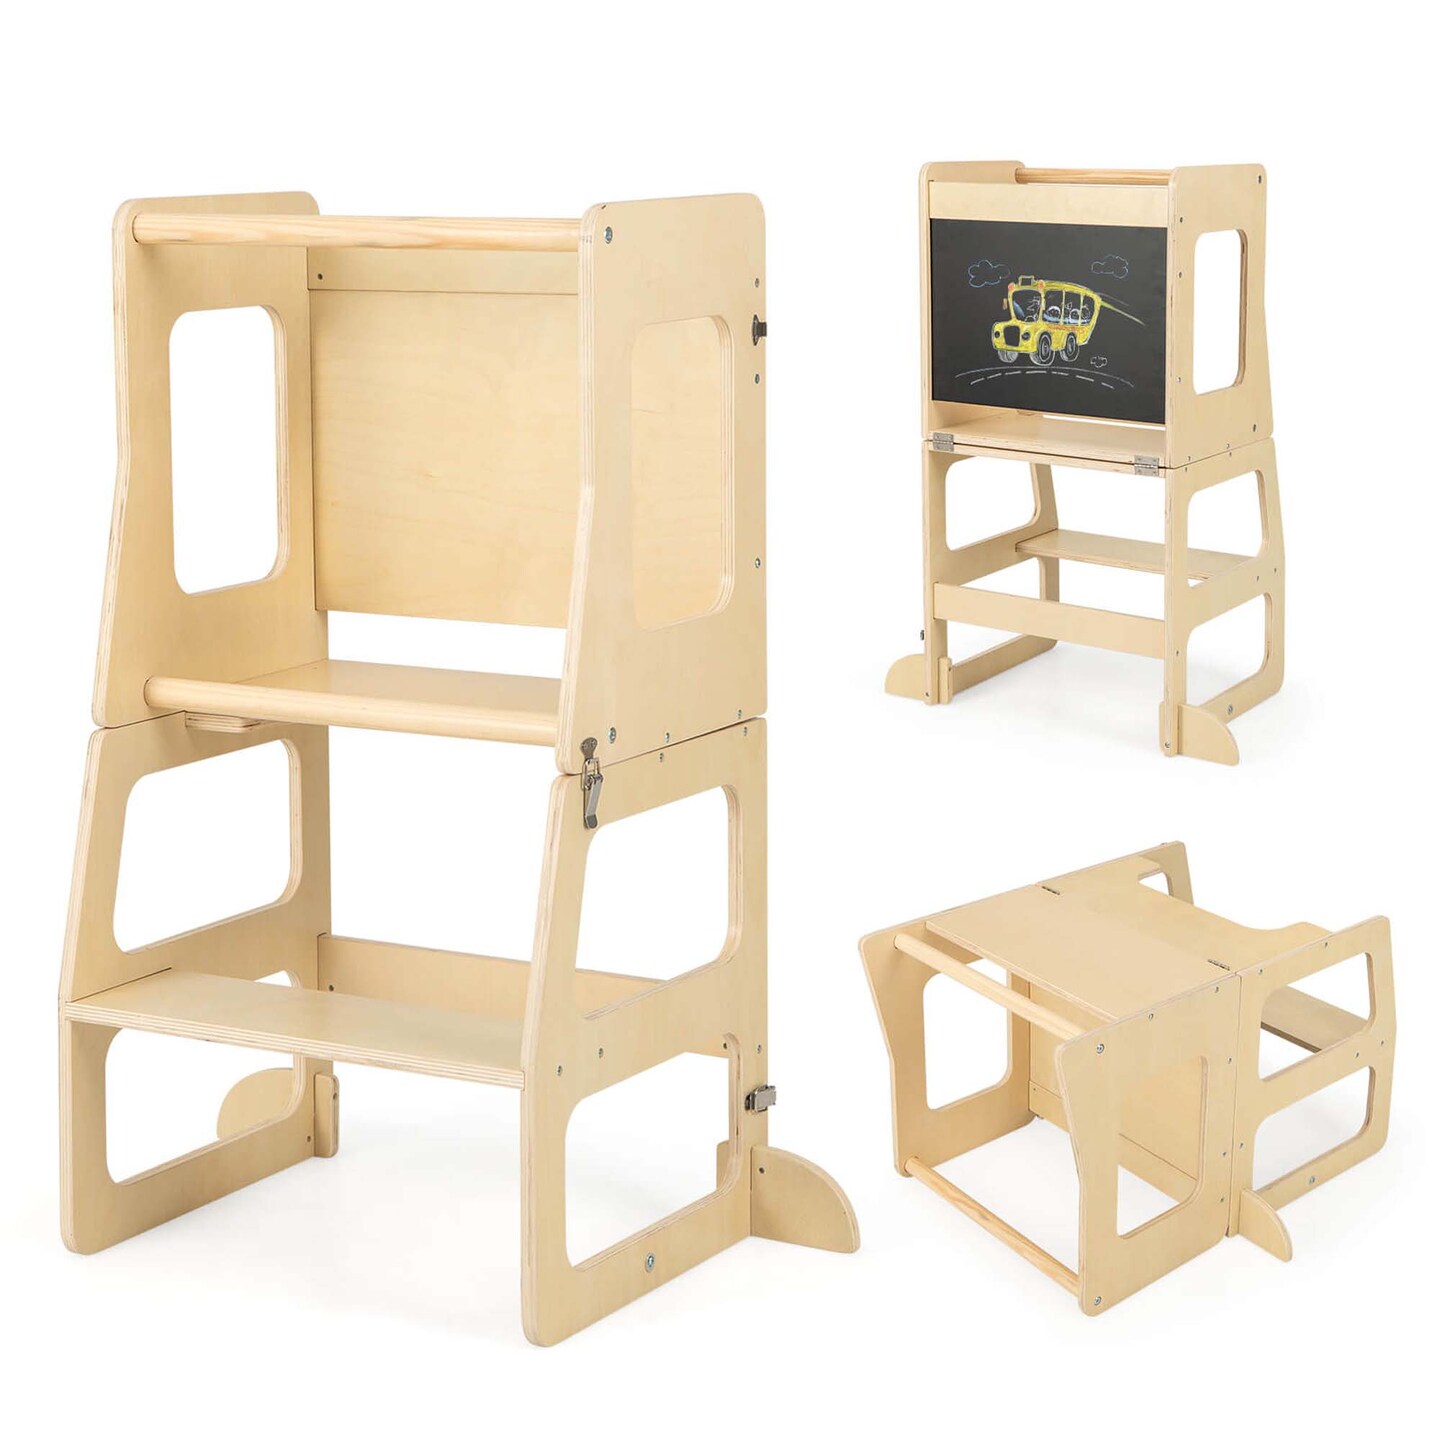 Costway 3-in-1 Foldable Kitchen Standing Tower for Toddlers with Chalkboard Weaning Table Natural